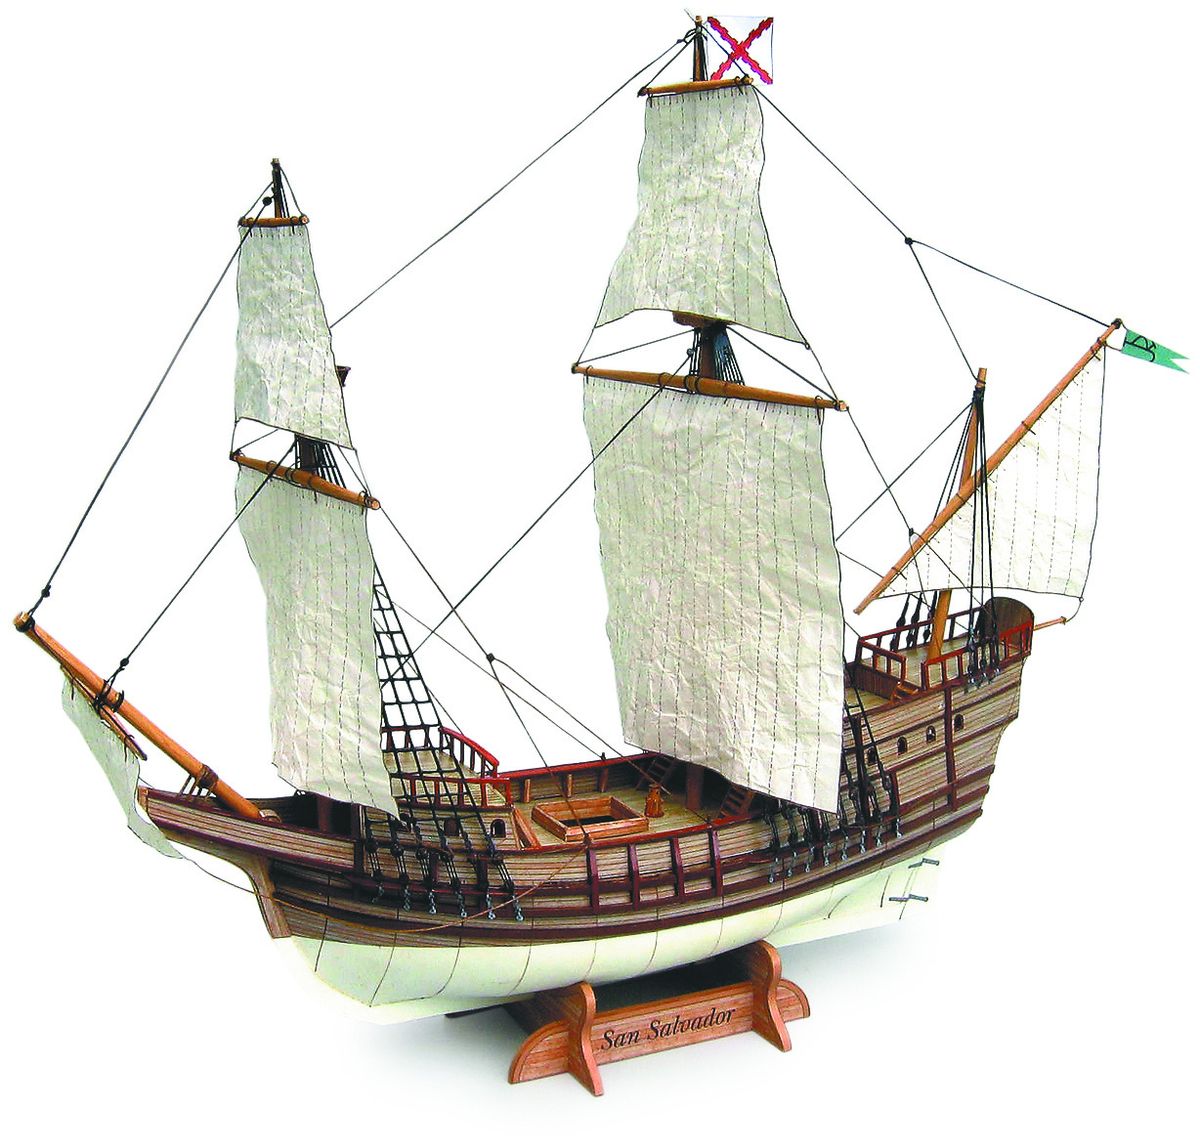 « A San Salvador galleon built out of paper, from Digital Navy.